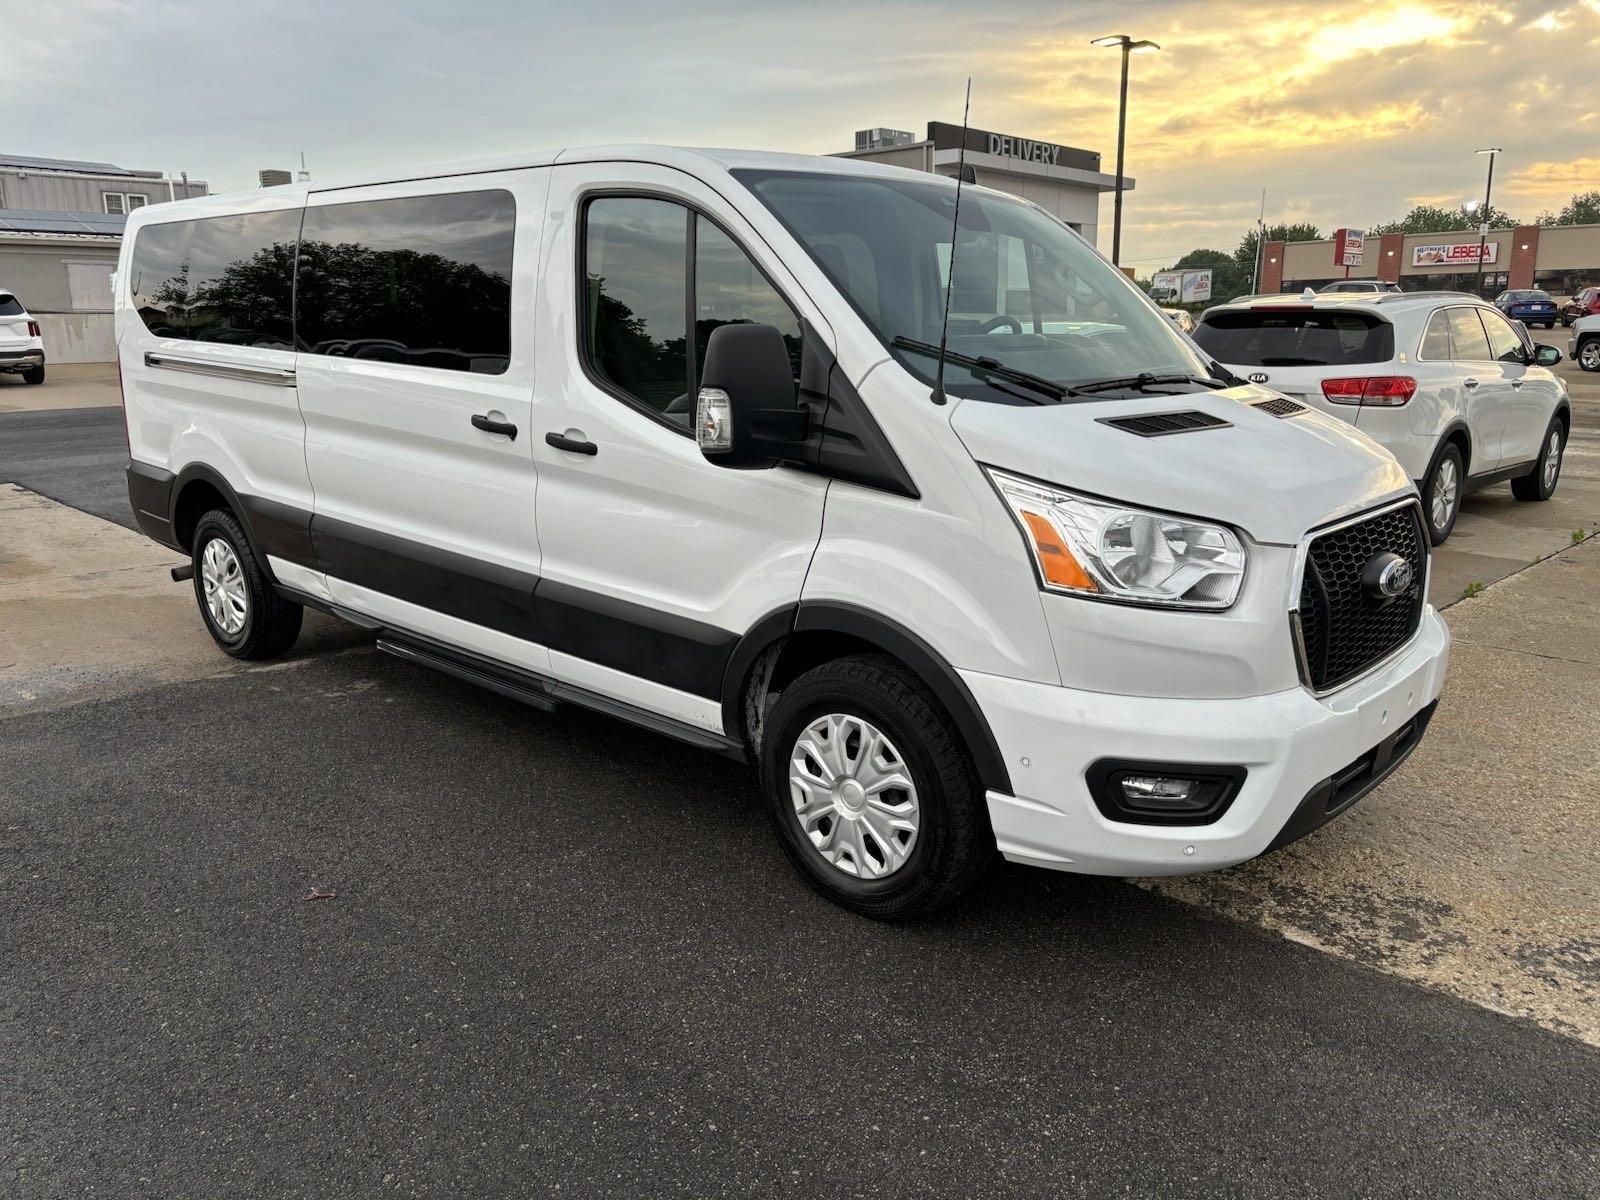 Used 2022 Ford Transit Passenger Wagon XLT Low Roof Van for sale in St Joseph MO